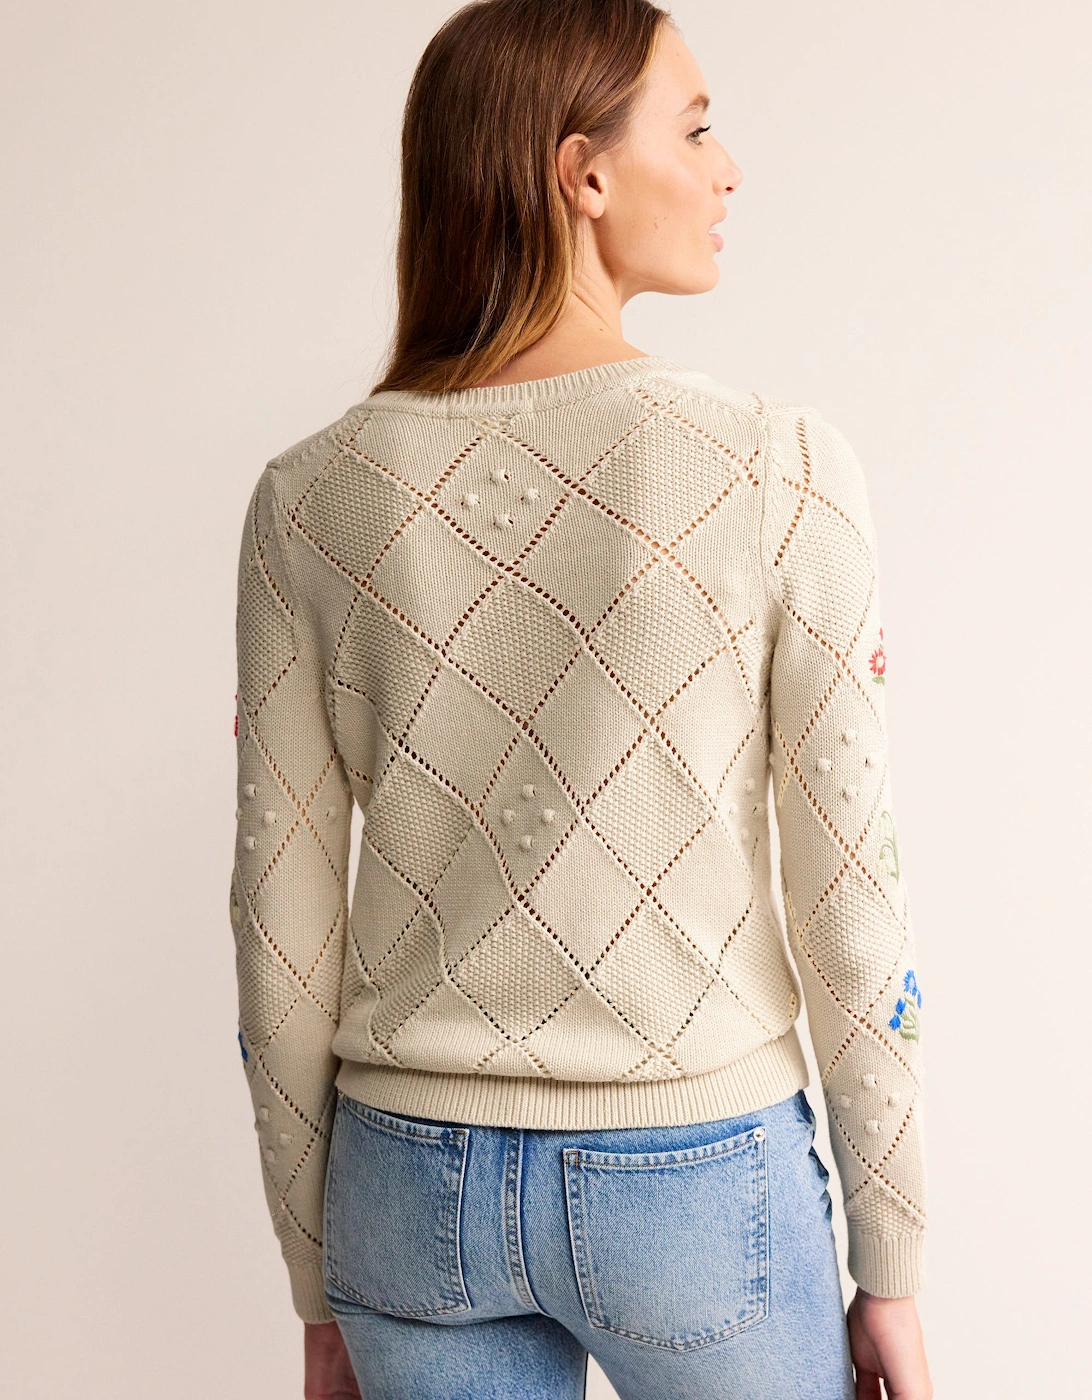 Cotton Embroidered Cardigan